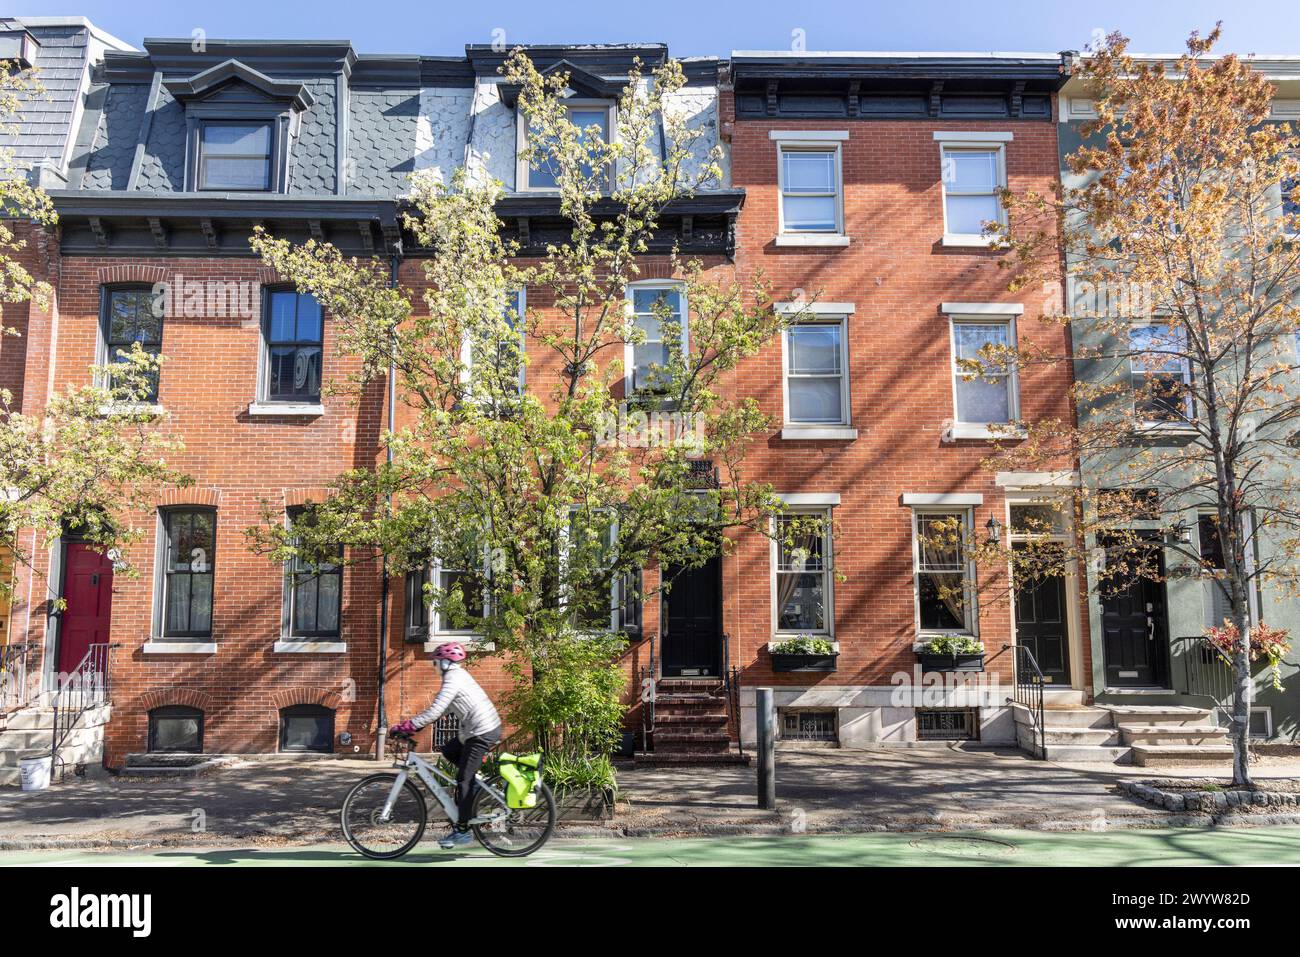 Cyclist in front of row homes, Fitlers Square neighborhood, Philadelphia, Pennsylvania, USA Stock Photo